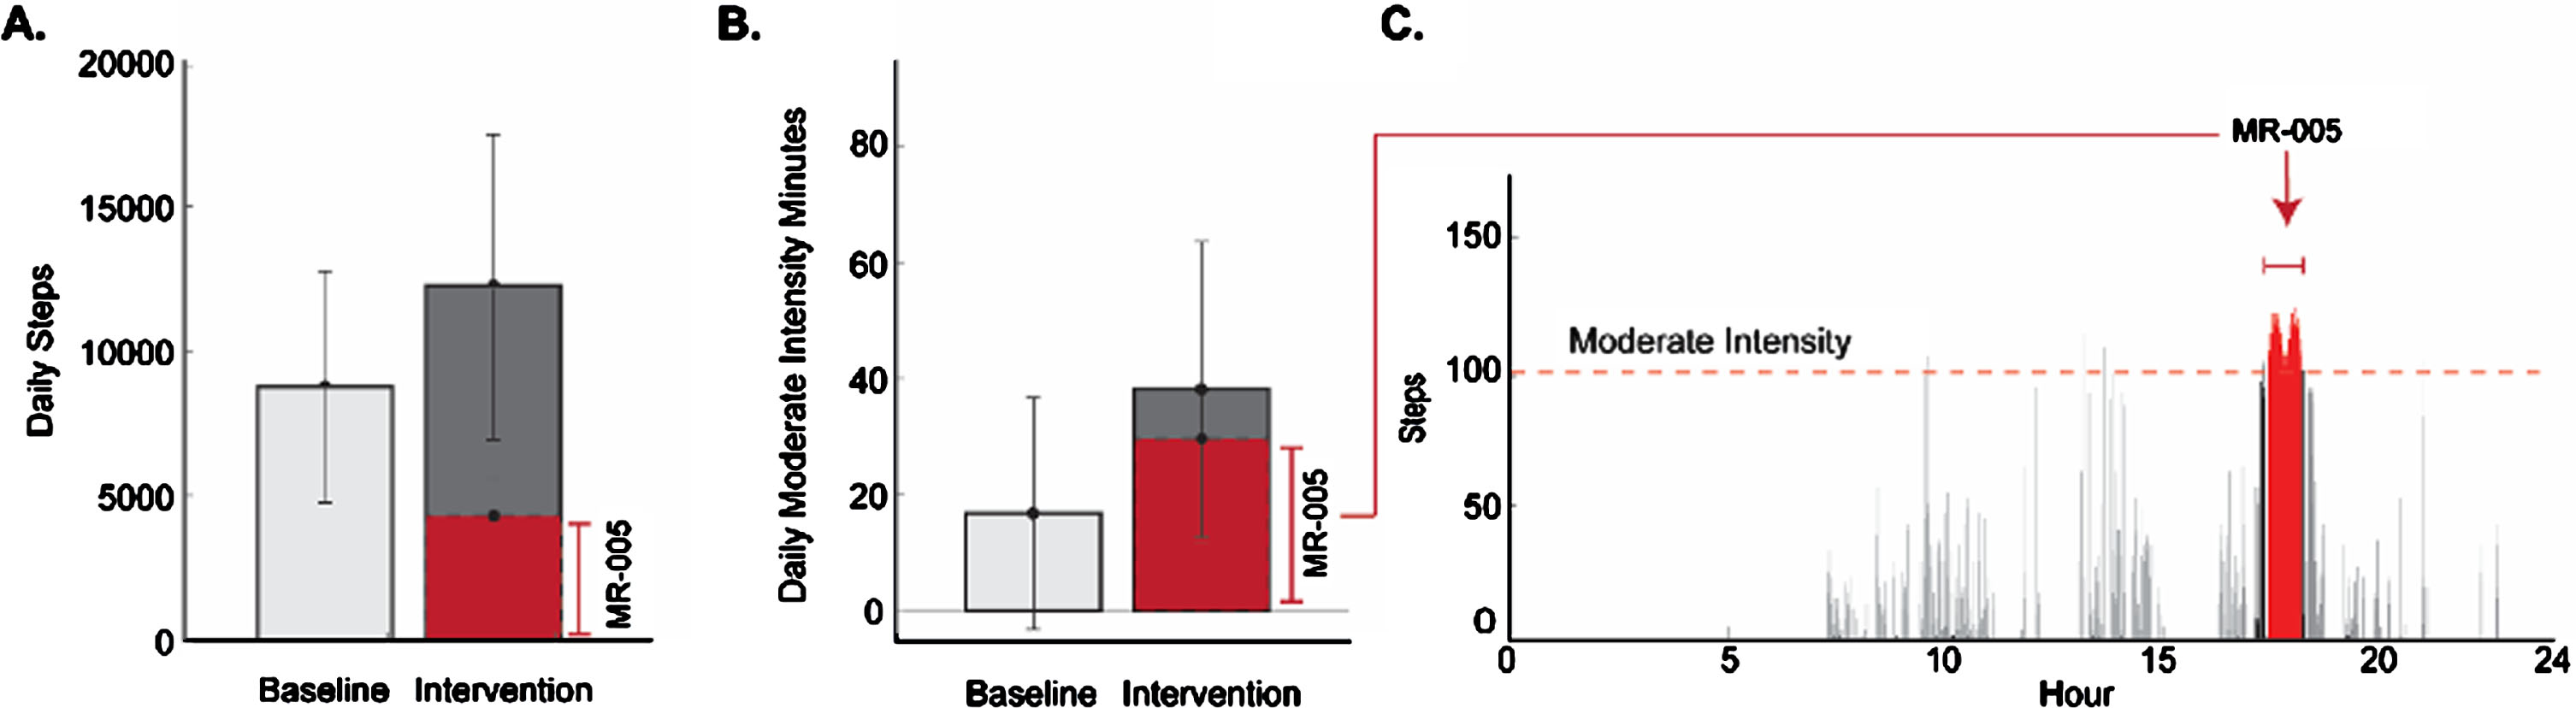 Mean daily steps (A) and moderate intensity minutes (B) at baseline and during intervention. Example single-day SAM data (C) displays steps recorded each minute, including moderate intensity minutes containing > /= 100 steps. Walking during intervention appears in red.